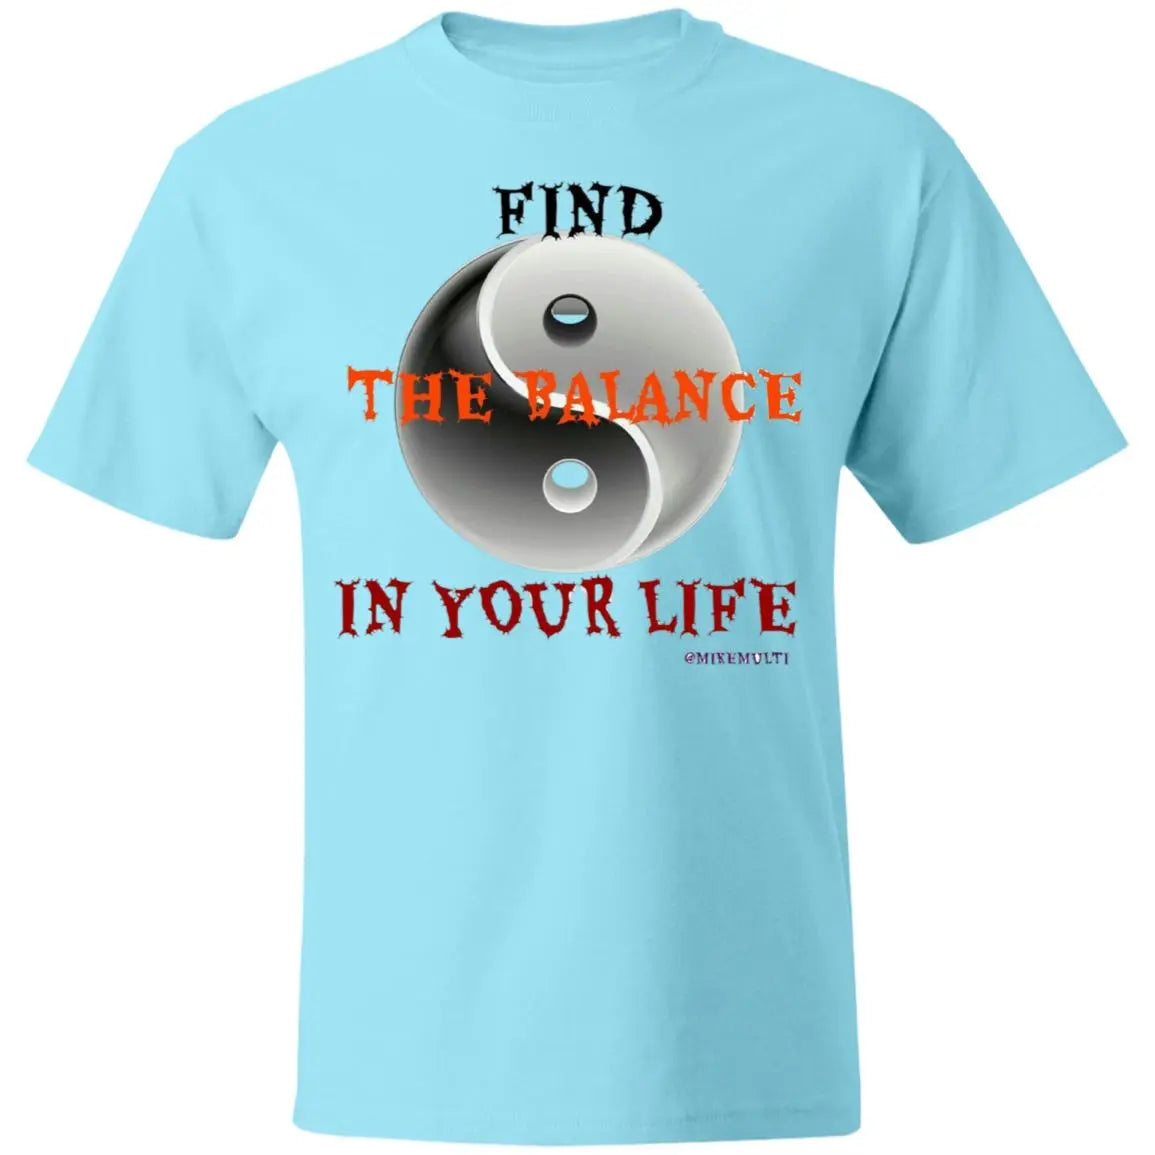 Find The Balance In Your Life - Men's Beefy T-Shirt CustomCat